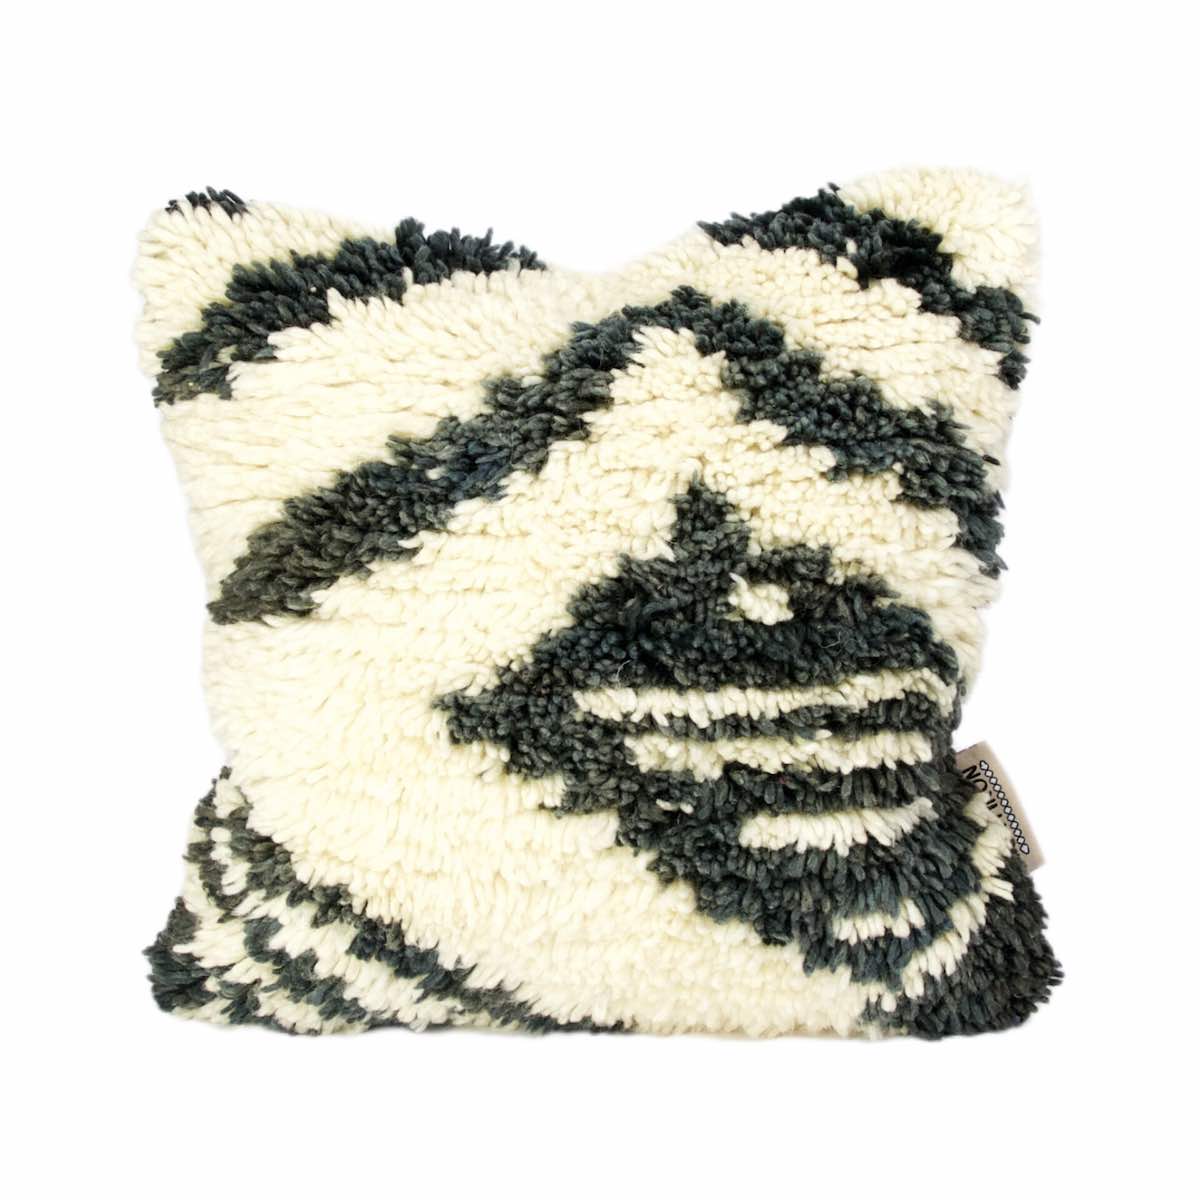 Fluffikon rug pillow made from black and white Moroccan wool rug. Its is presented as quirky new home gift idea.